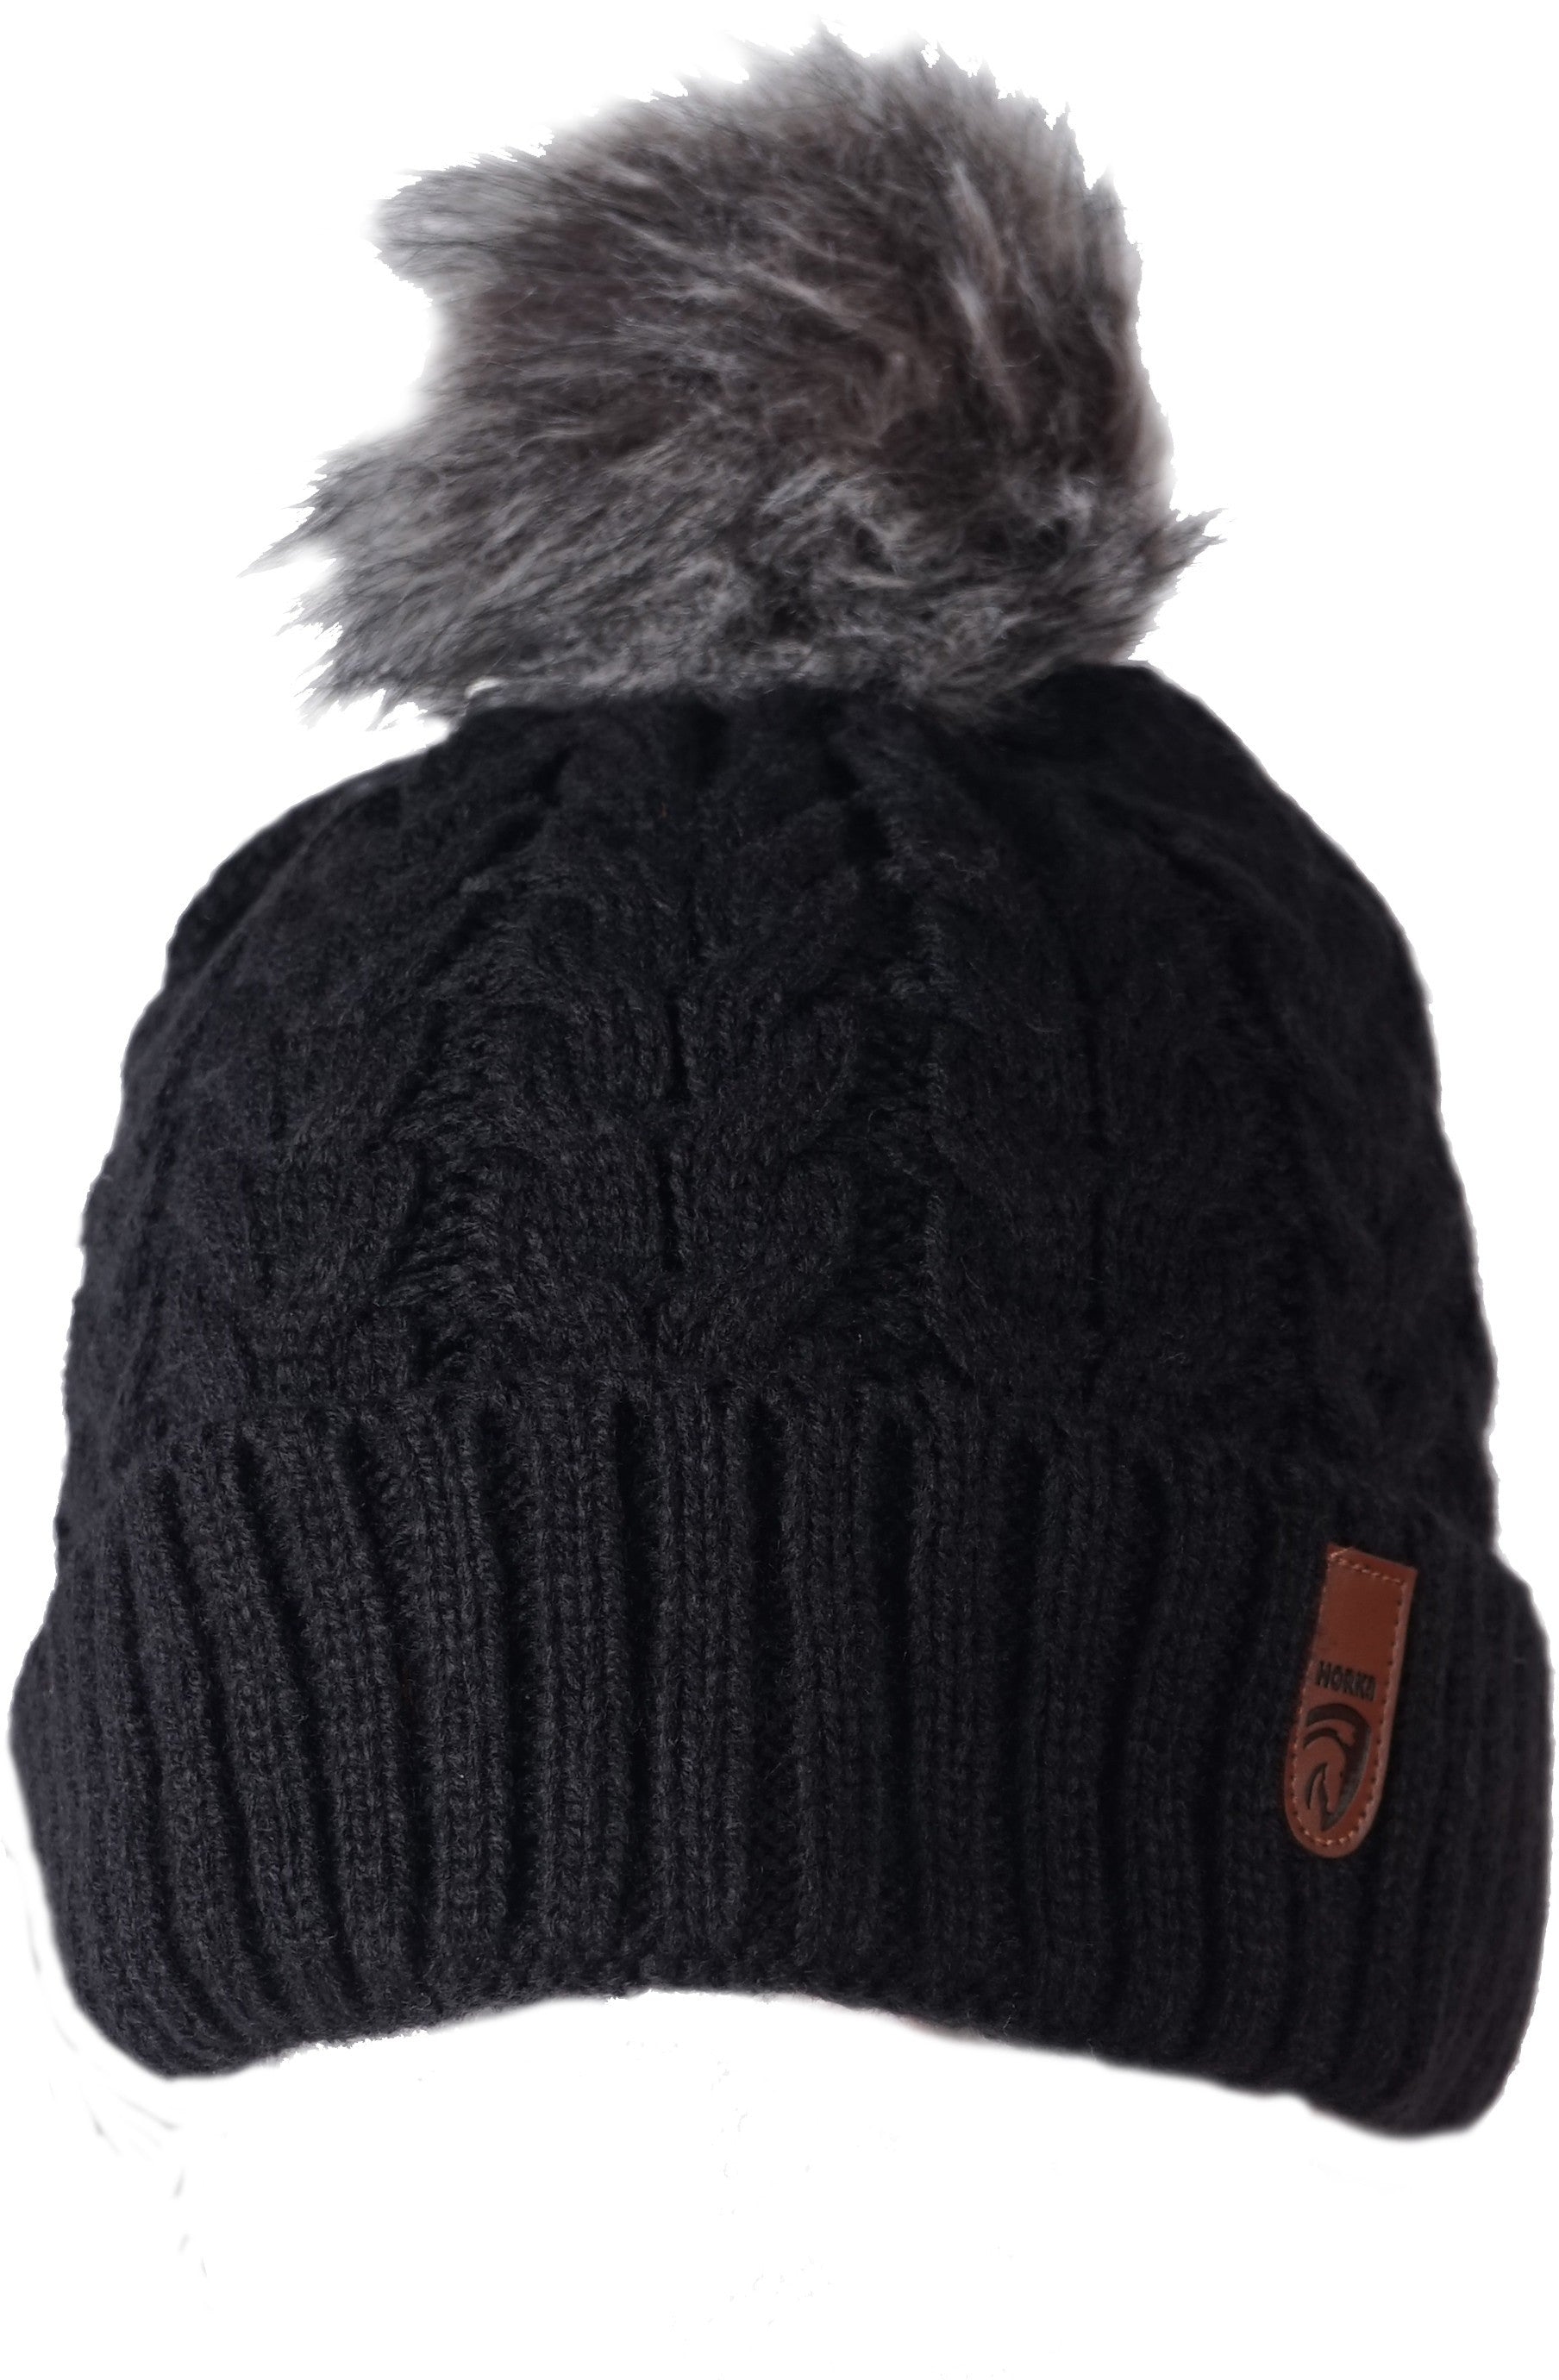 Horka Knitted Hat 'Jazz' - Top Of The Clops